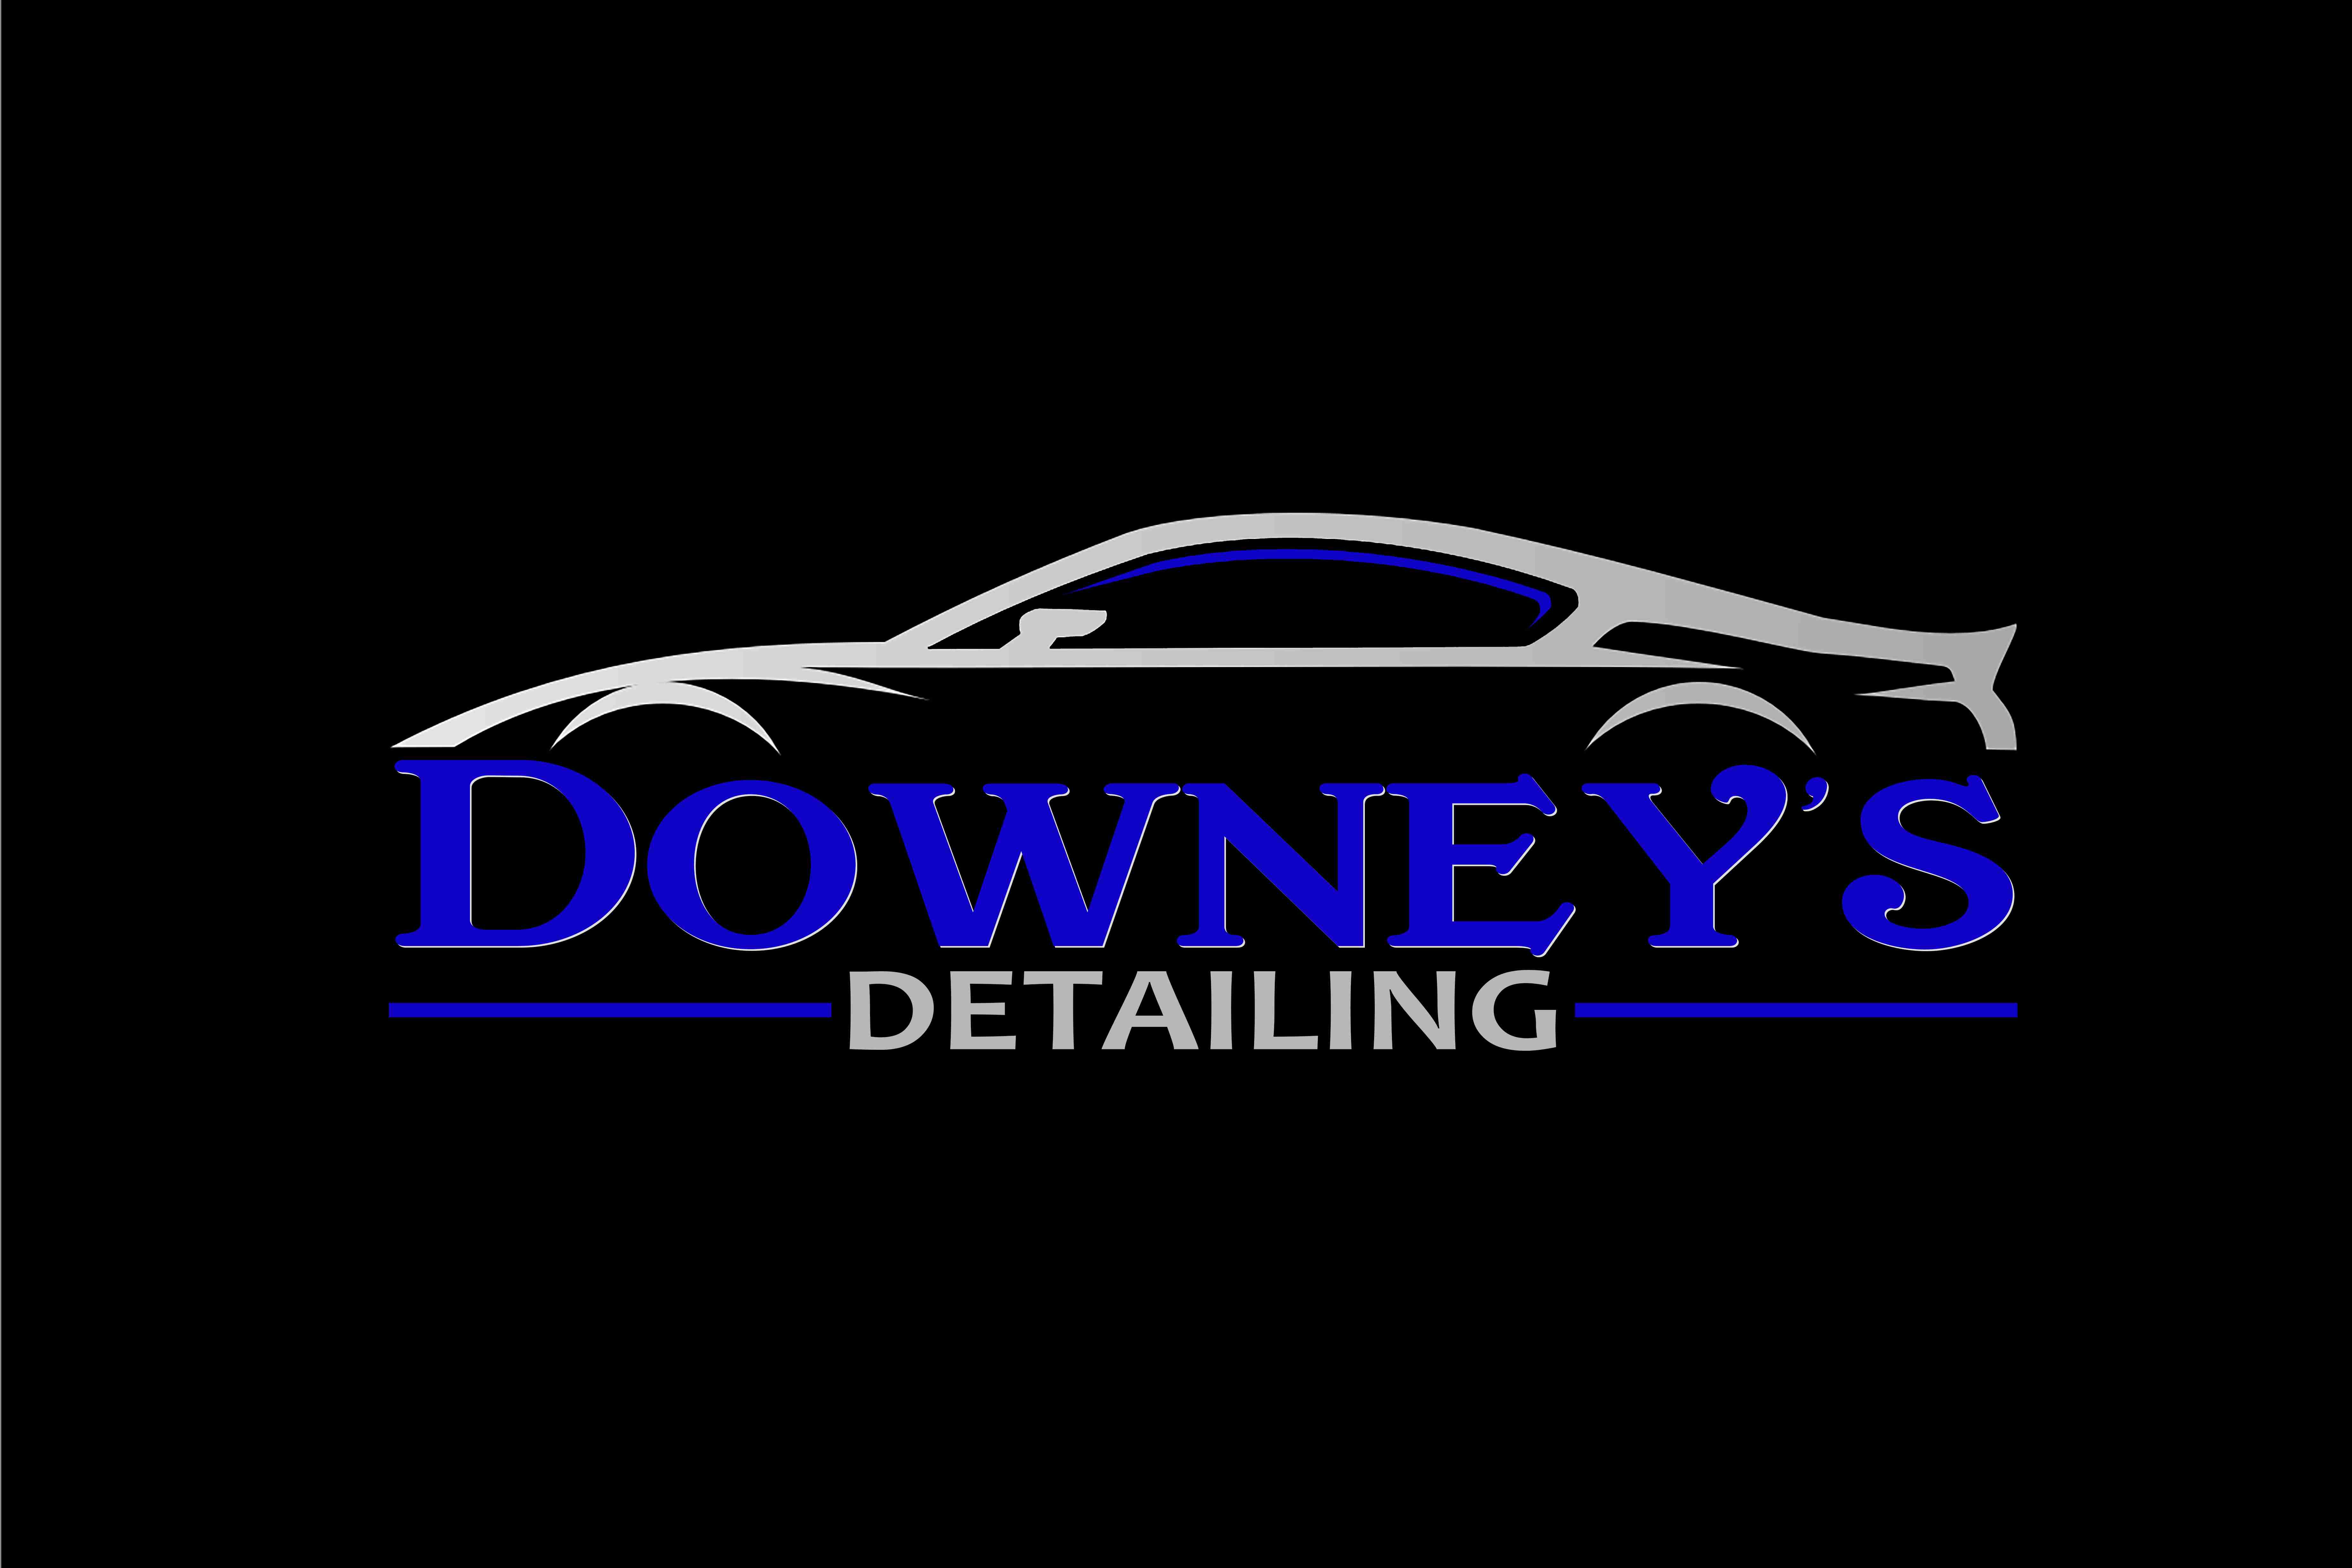 Downey Need Car Wash Cleaning Detailing Supplies?